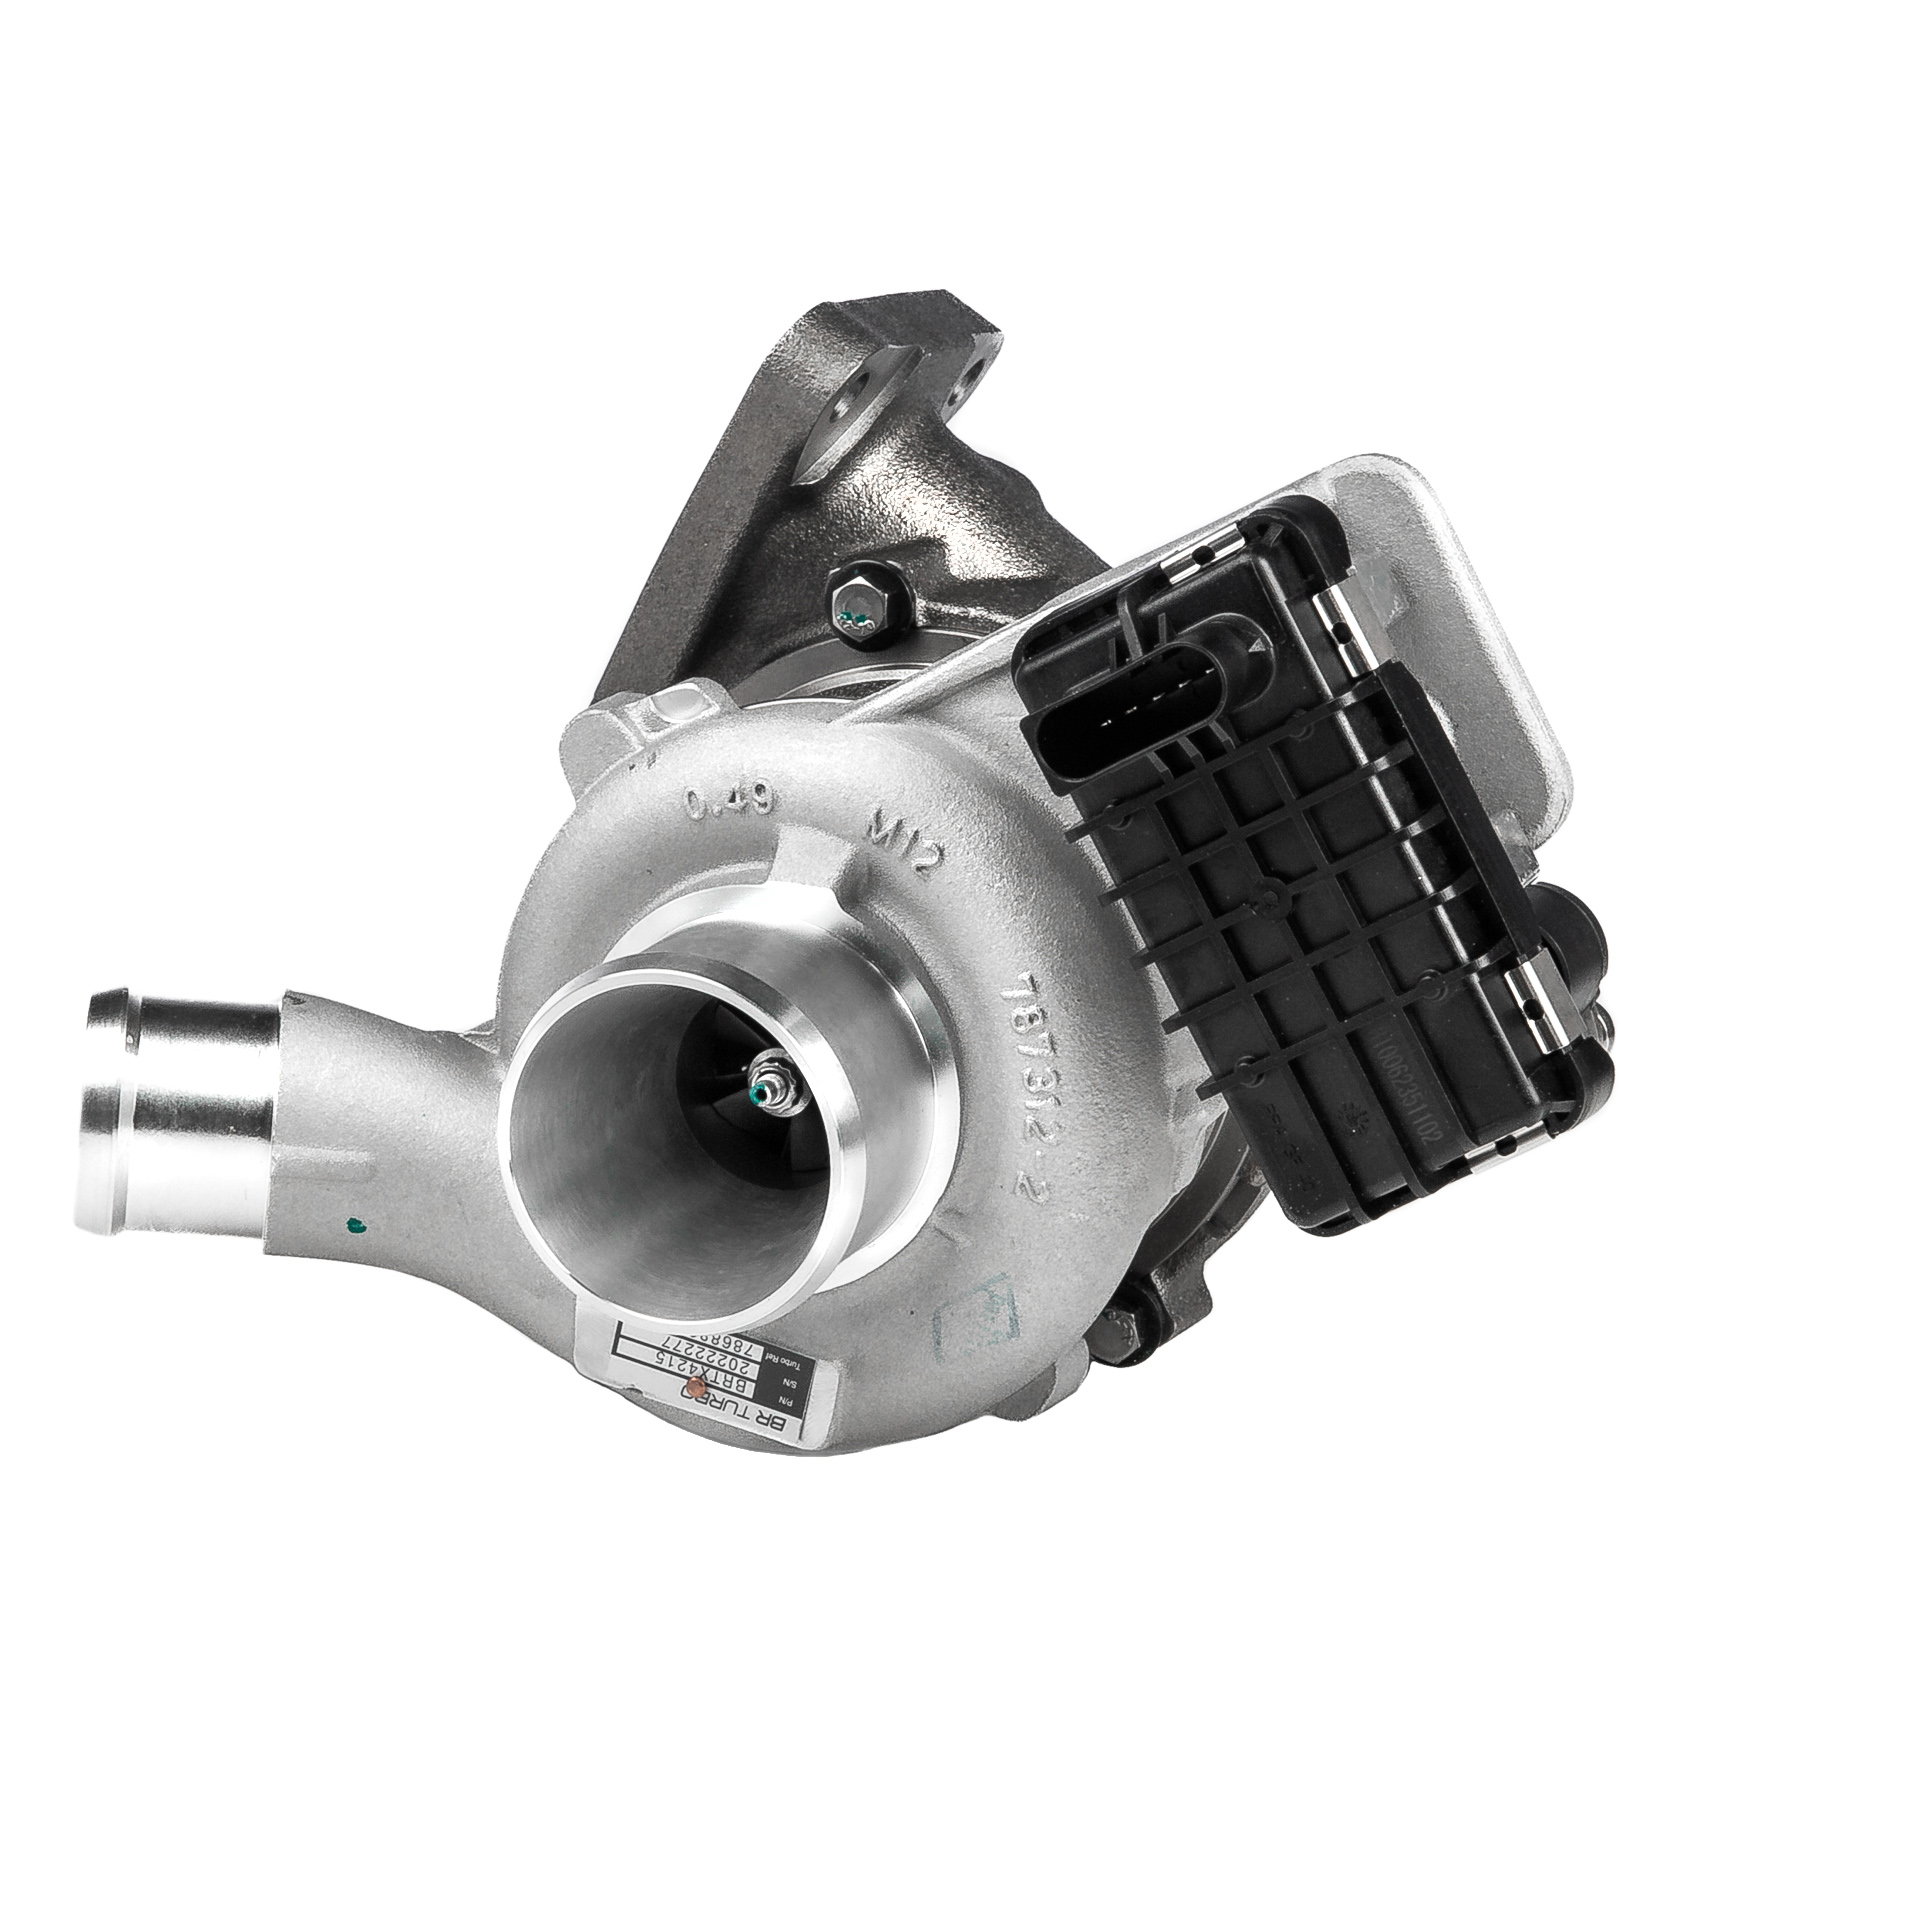 Ford Turbocharger BR Turbo BRTX4215 at a good price